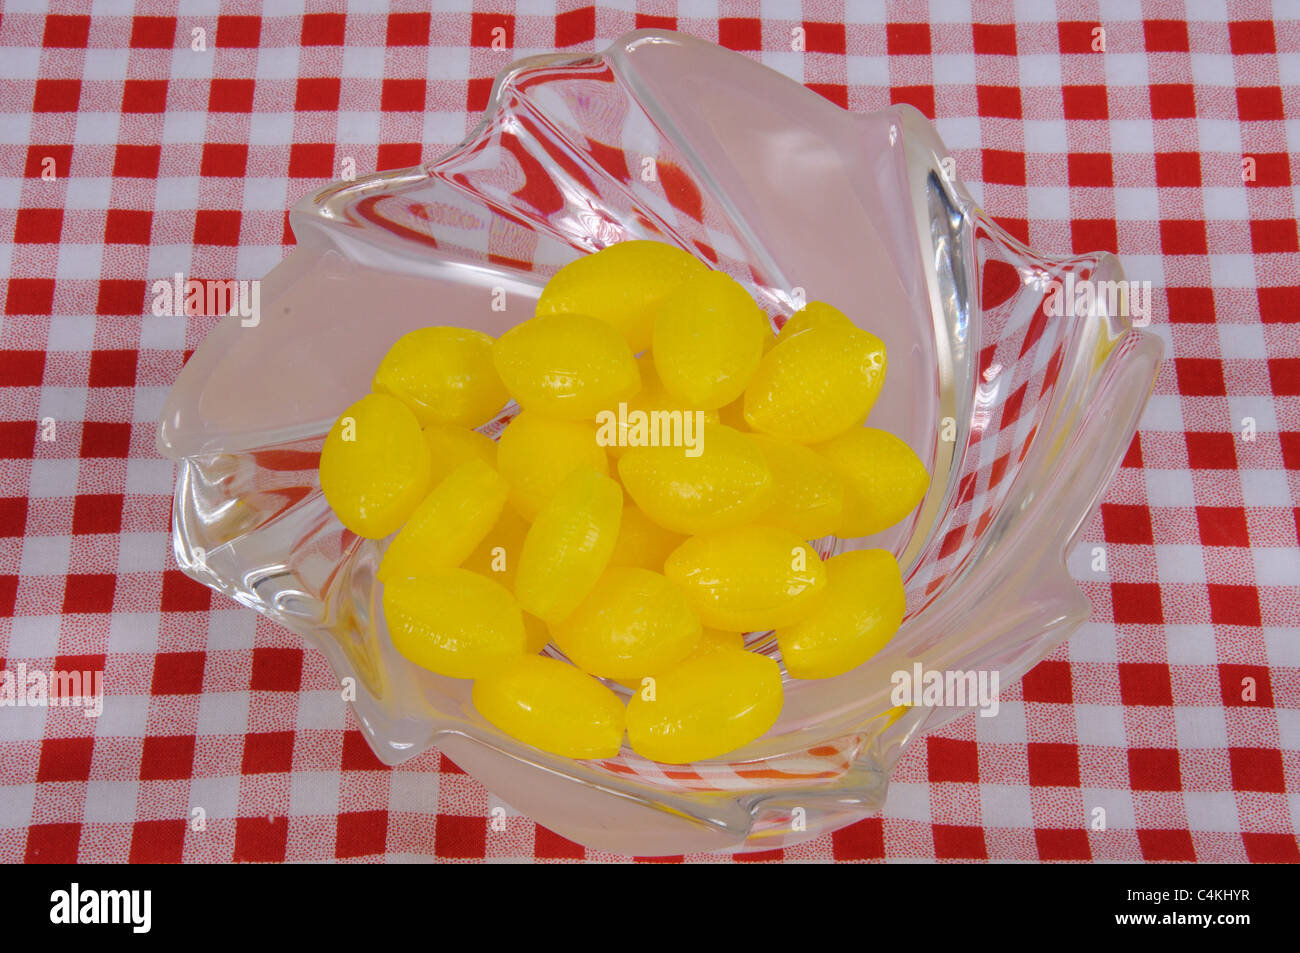 Glass dish with Sherbet Lemons, Urb. Calypso, Costa del Sol, Malaga Province, Andalucia, Spain, Western Europe. Stock Photo